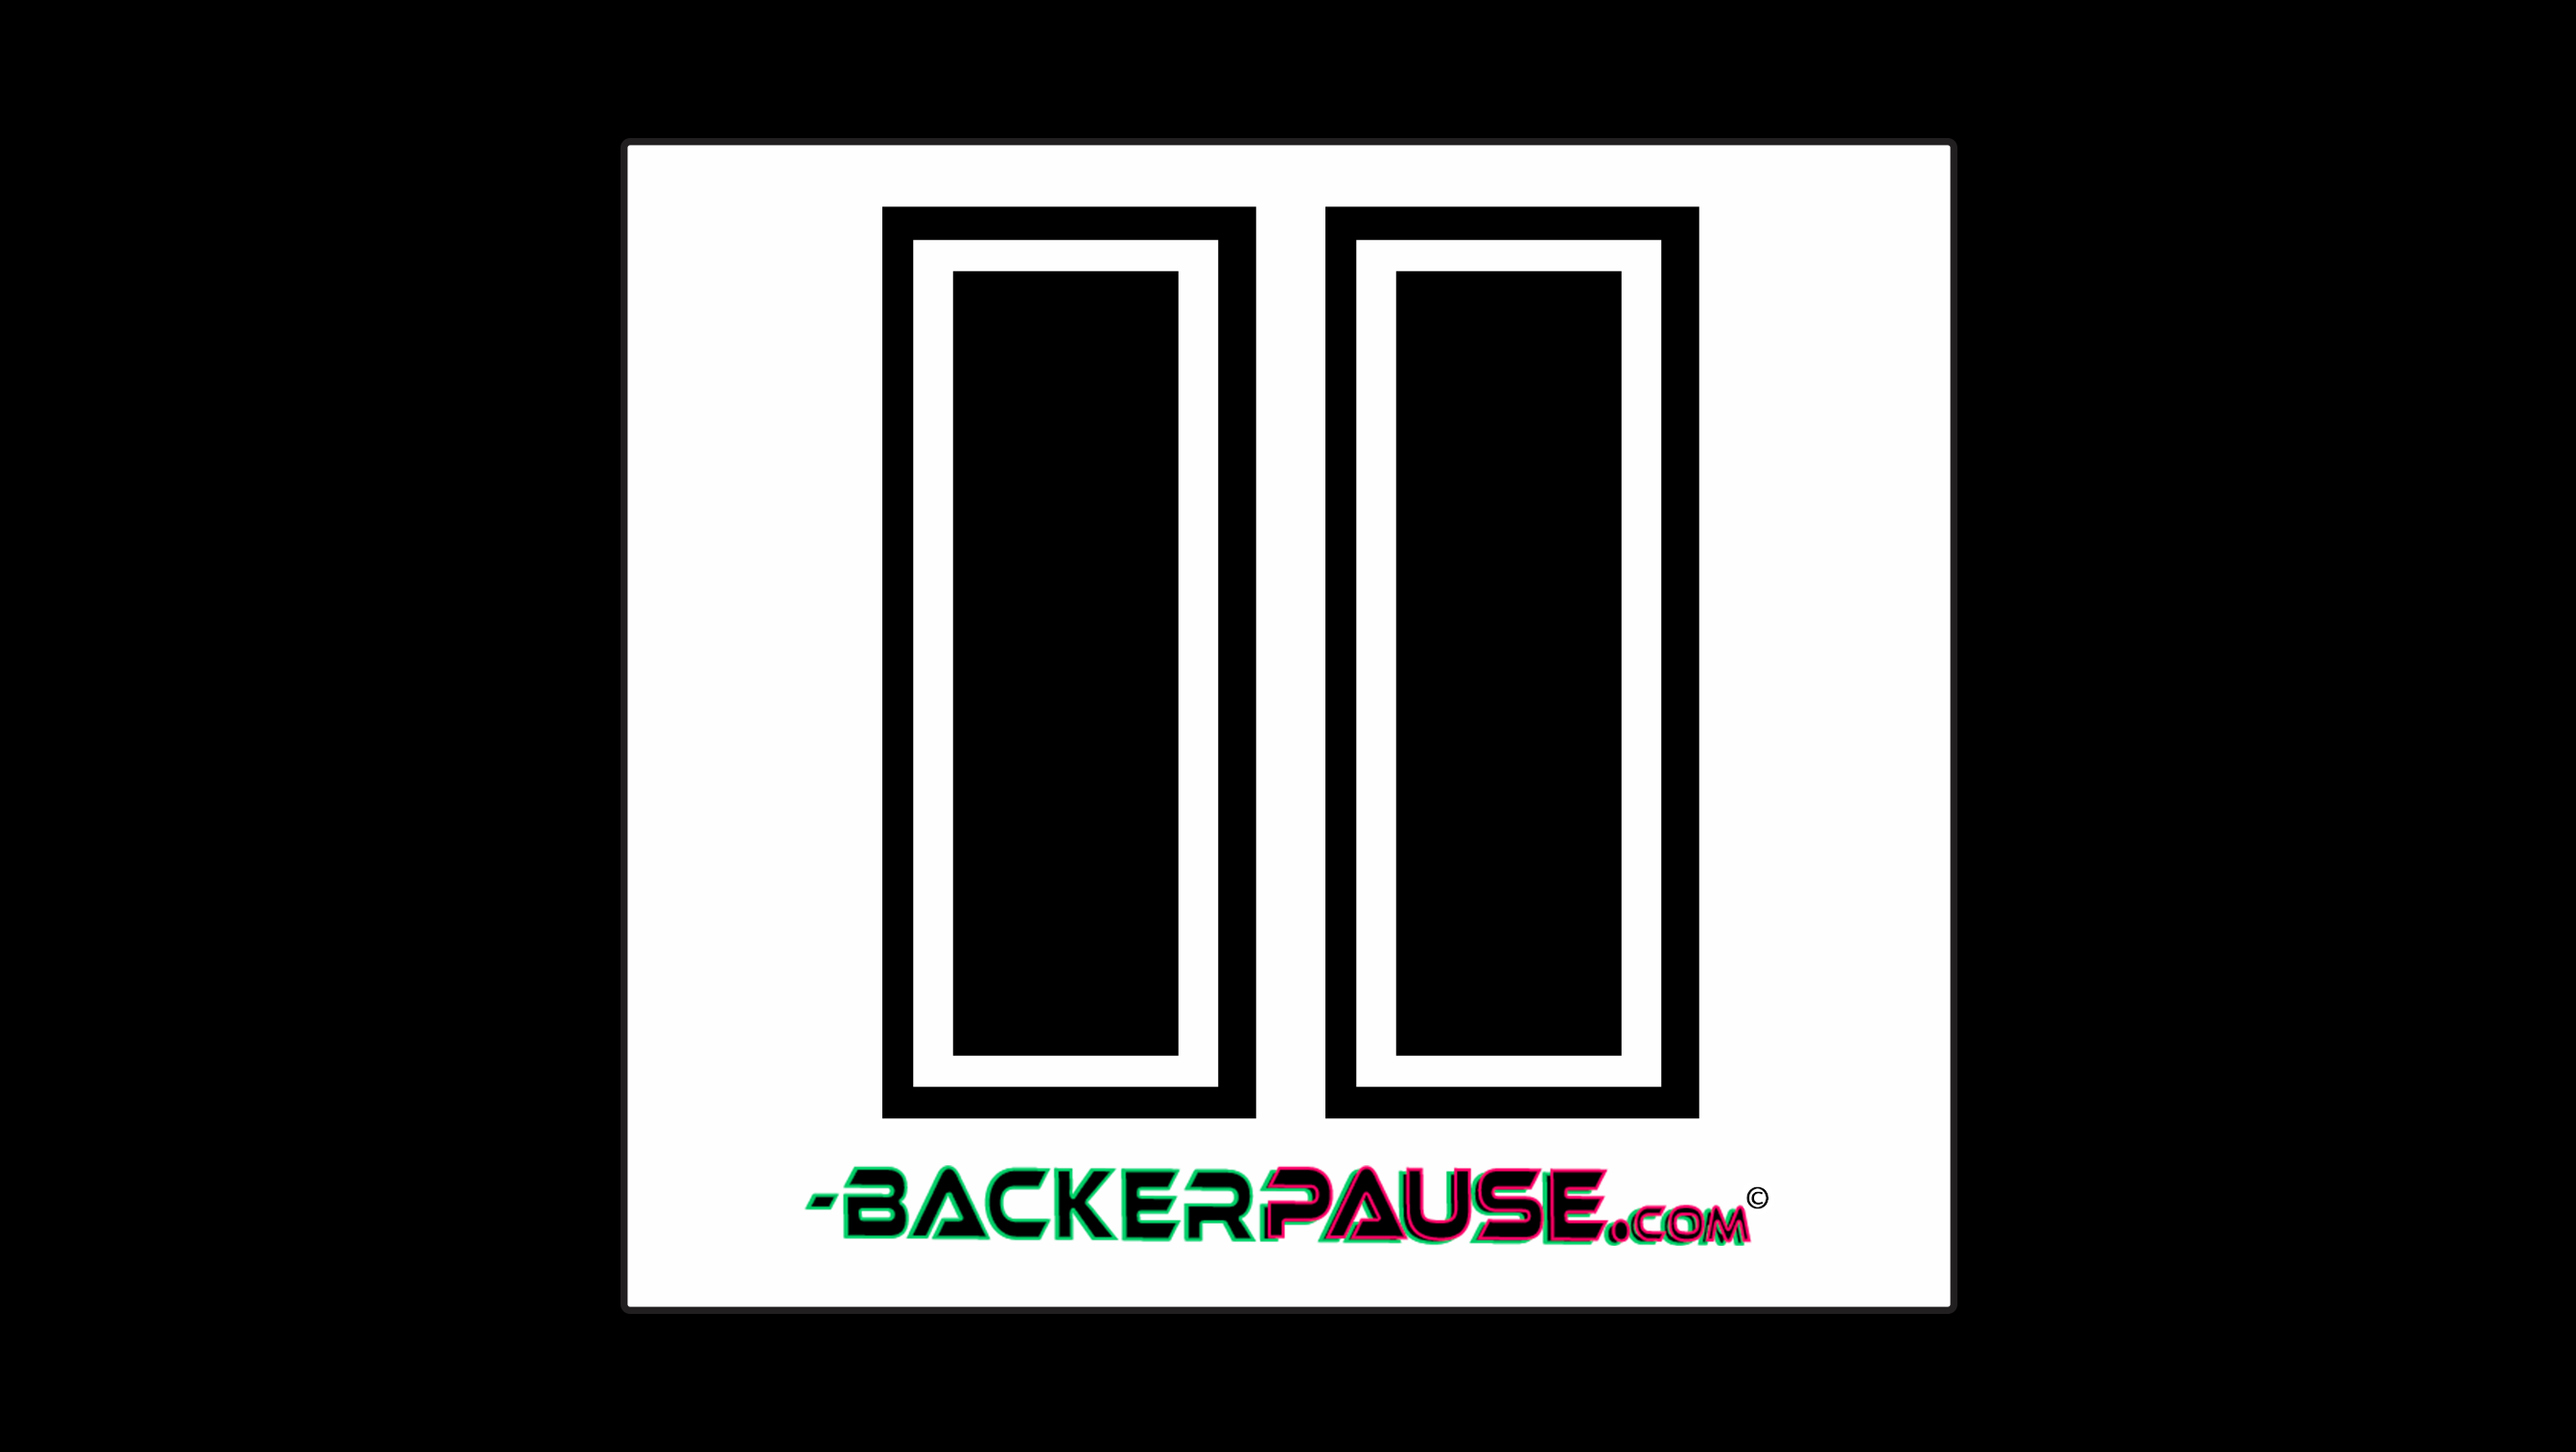 Crowdfunding ADVOCACY!!! is Backer  PAUSE Wk39of22